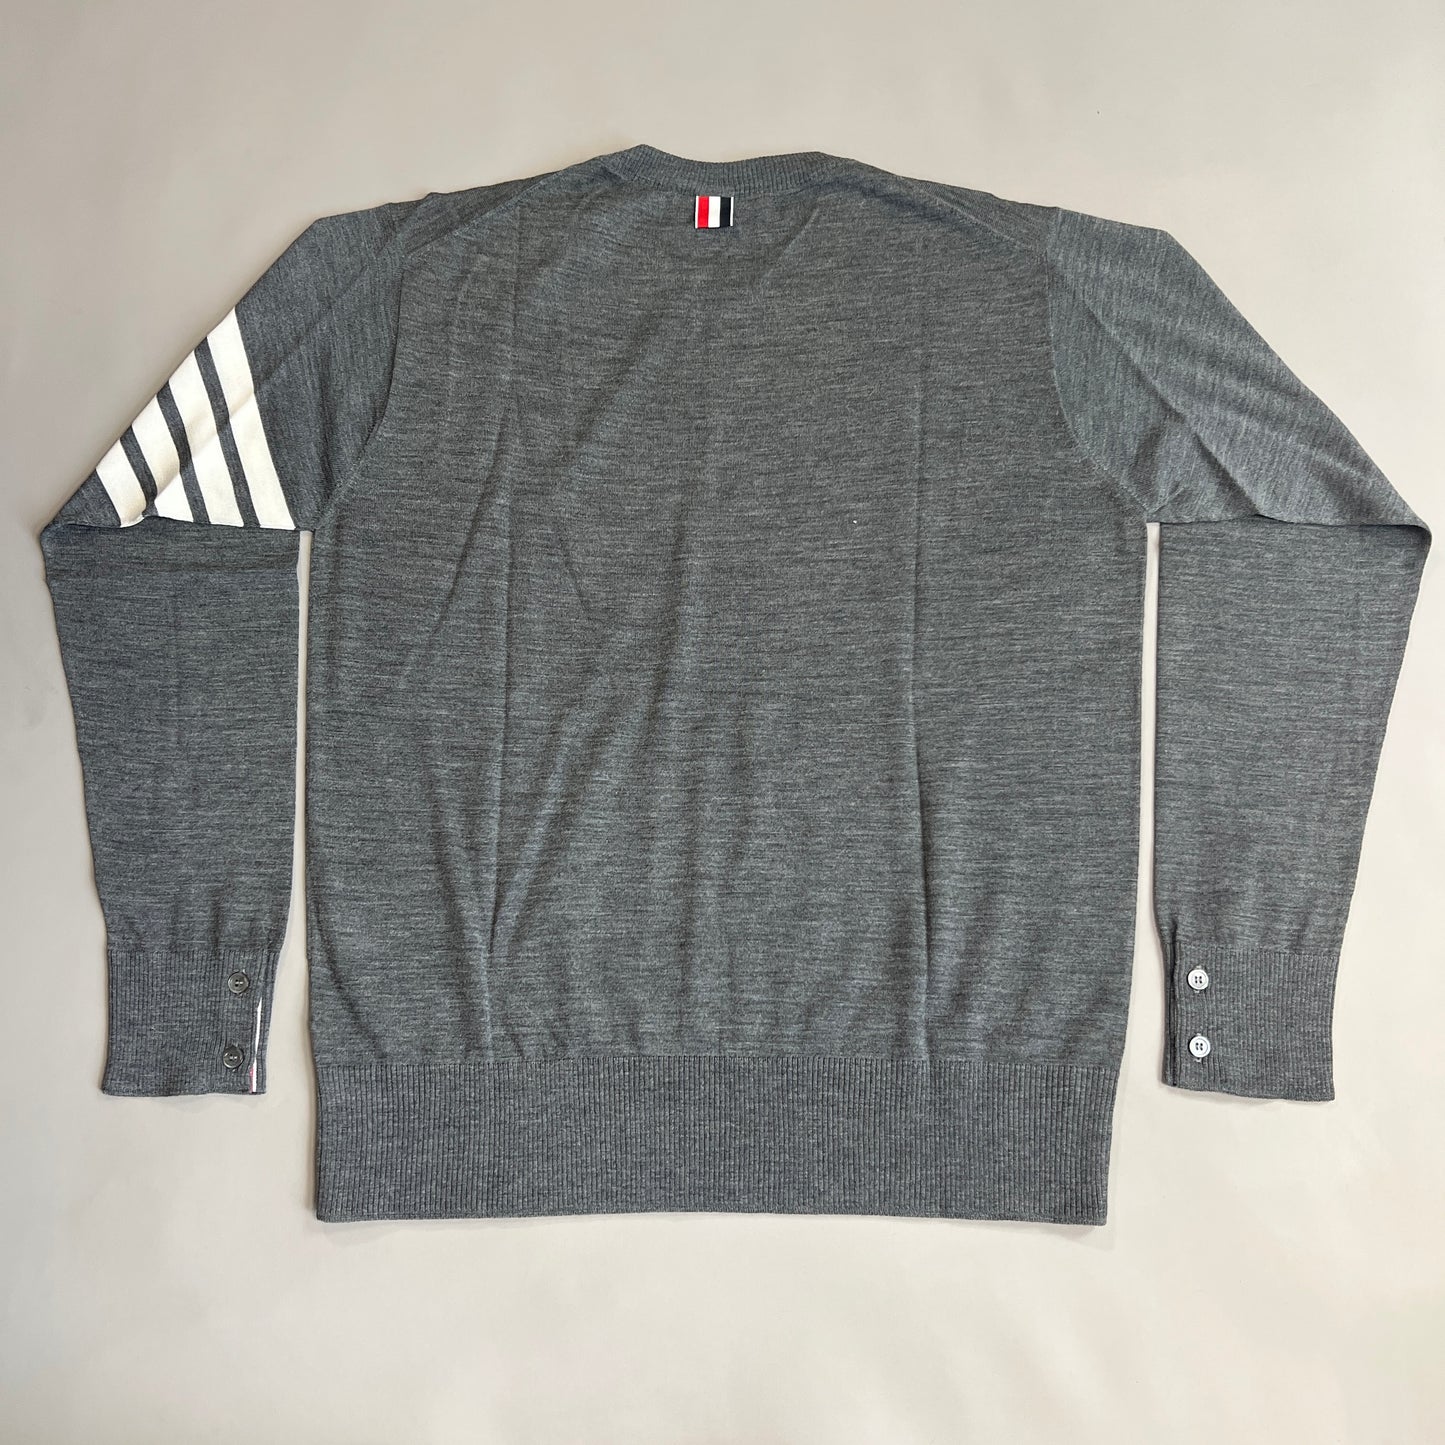 THOM BROWNE New York Classic Crewneck Pullover w/4 Bar Sleeve in Sustainable Fine Merino Wool Med Grey Size 1 (New)